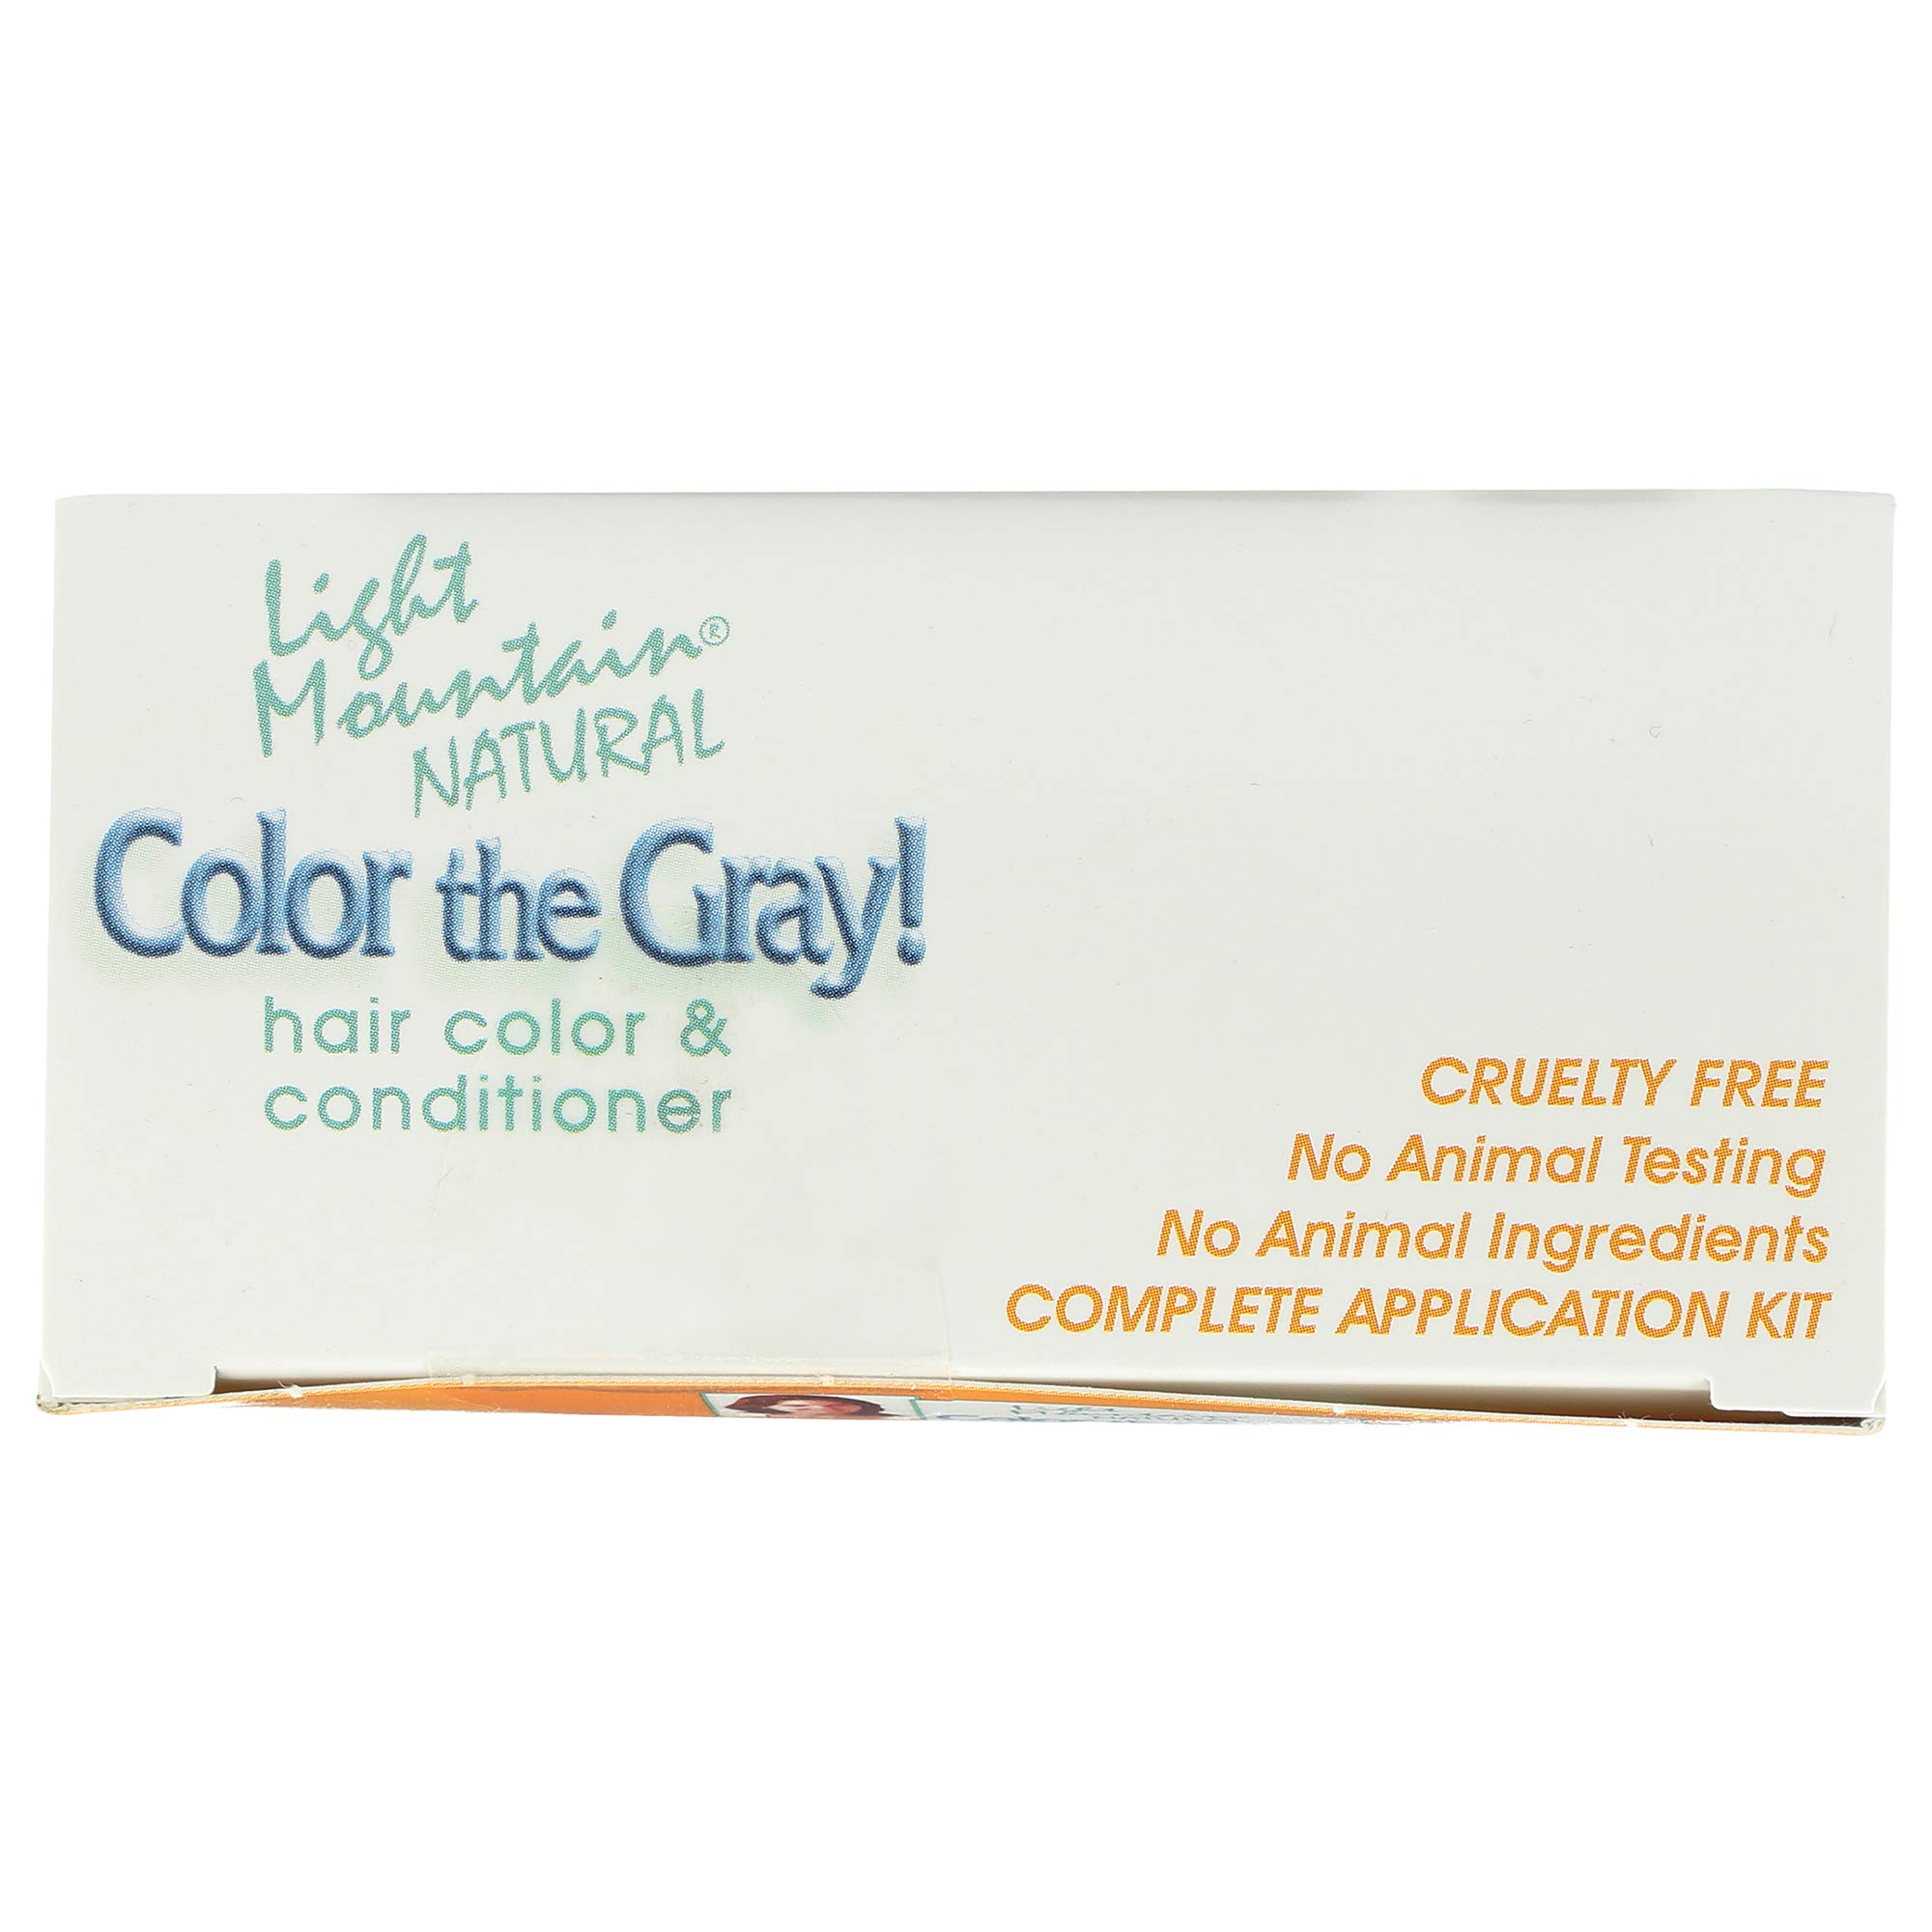 Light Mountain Natural Color The Gray! Hair Color & Conditioner, Mahogany, 7 oz (197 g) (Pack of 2)